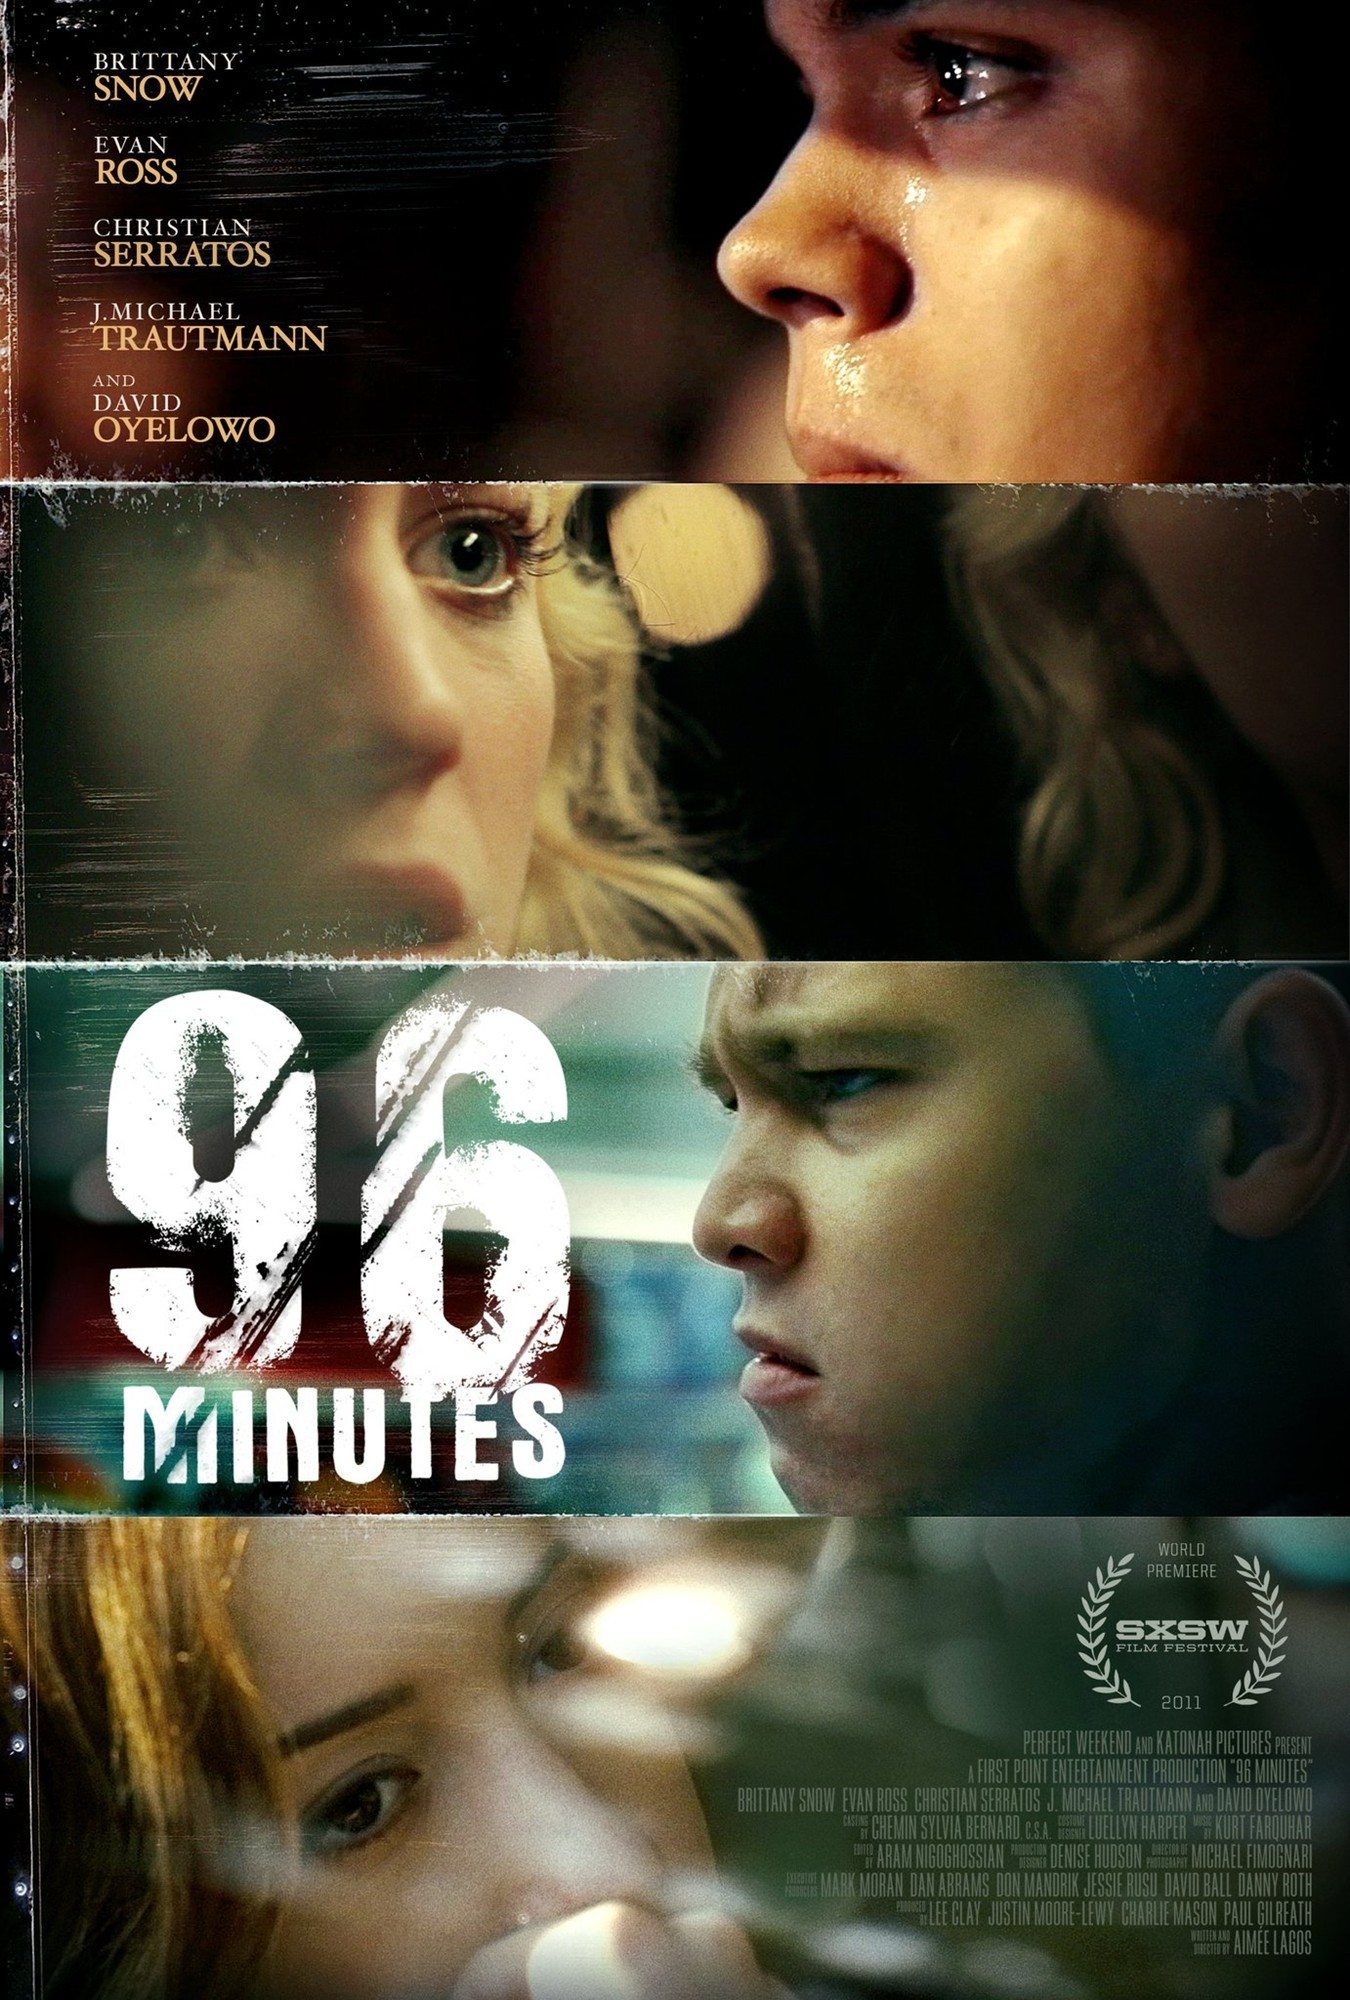 poster-96-minutes01.jpg